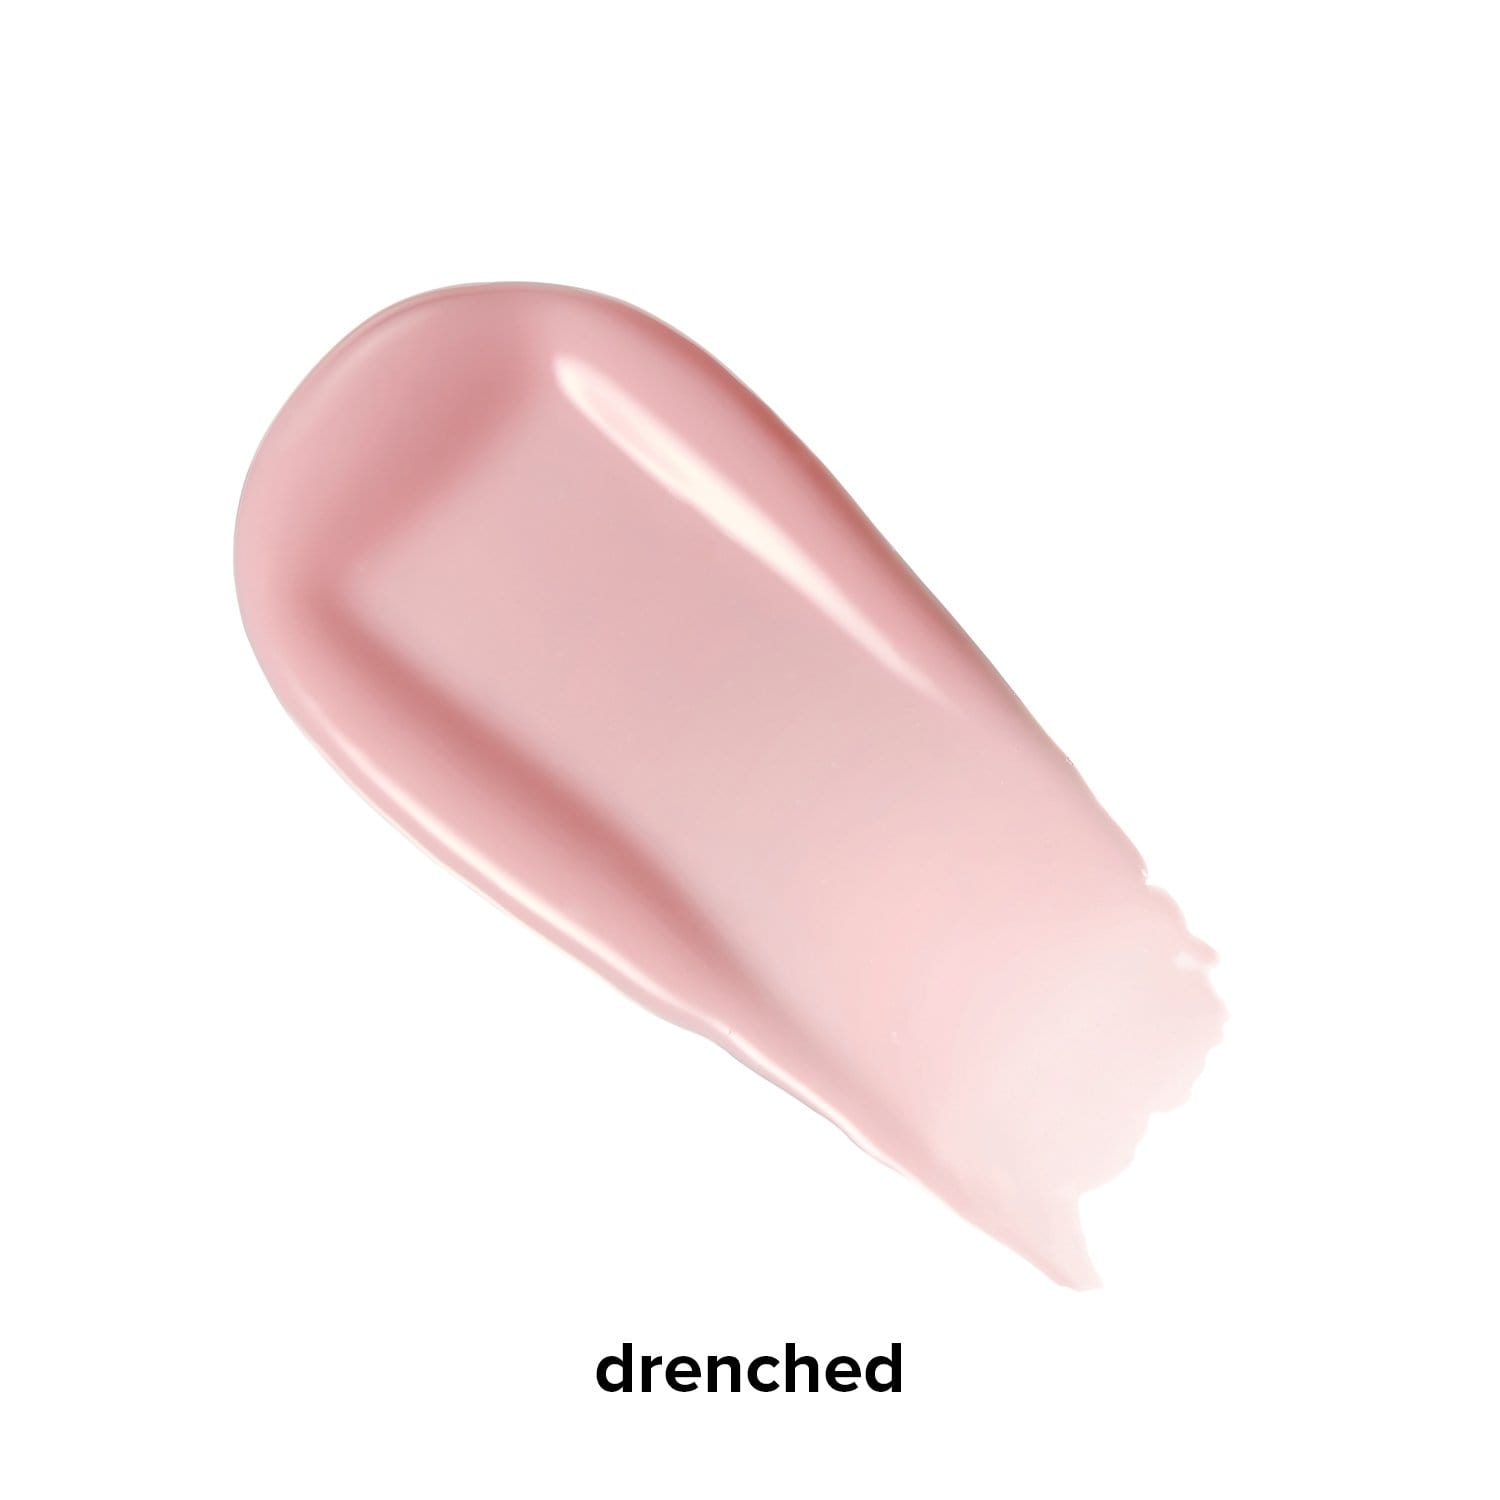 gloss'd Drenched - Nude Makeup supercharged gloss oil